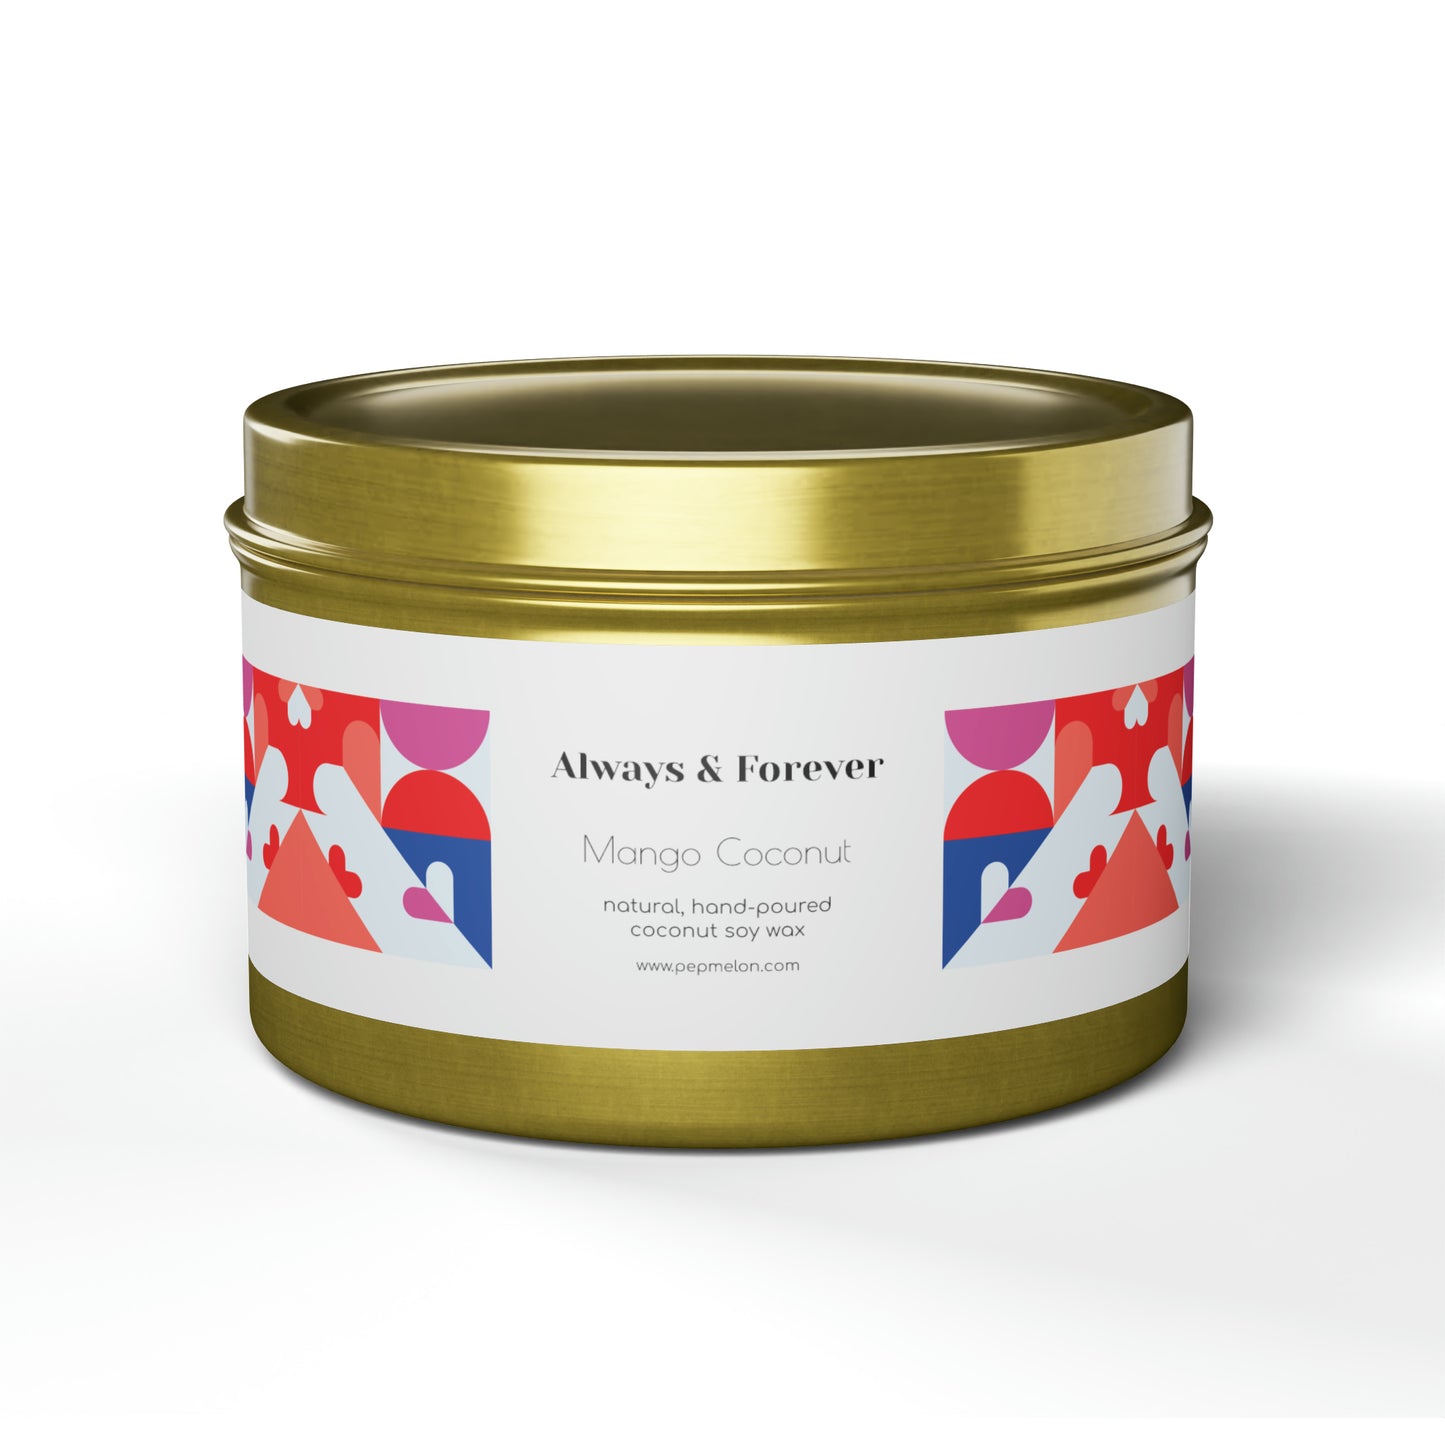 Mango Coconut Always & Forever scentedTin Candle